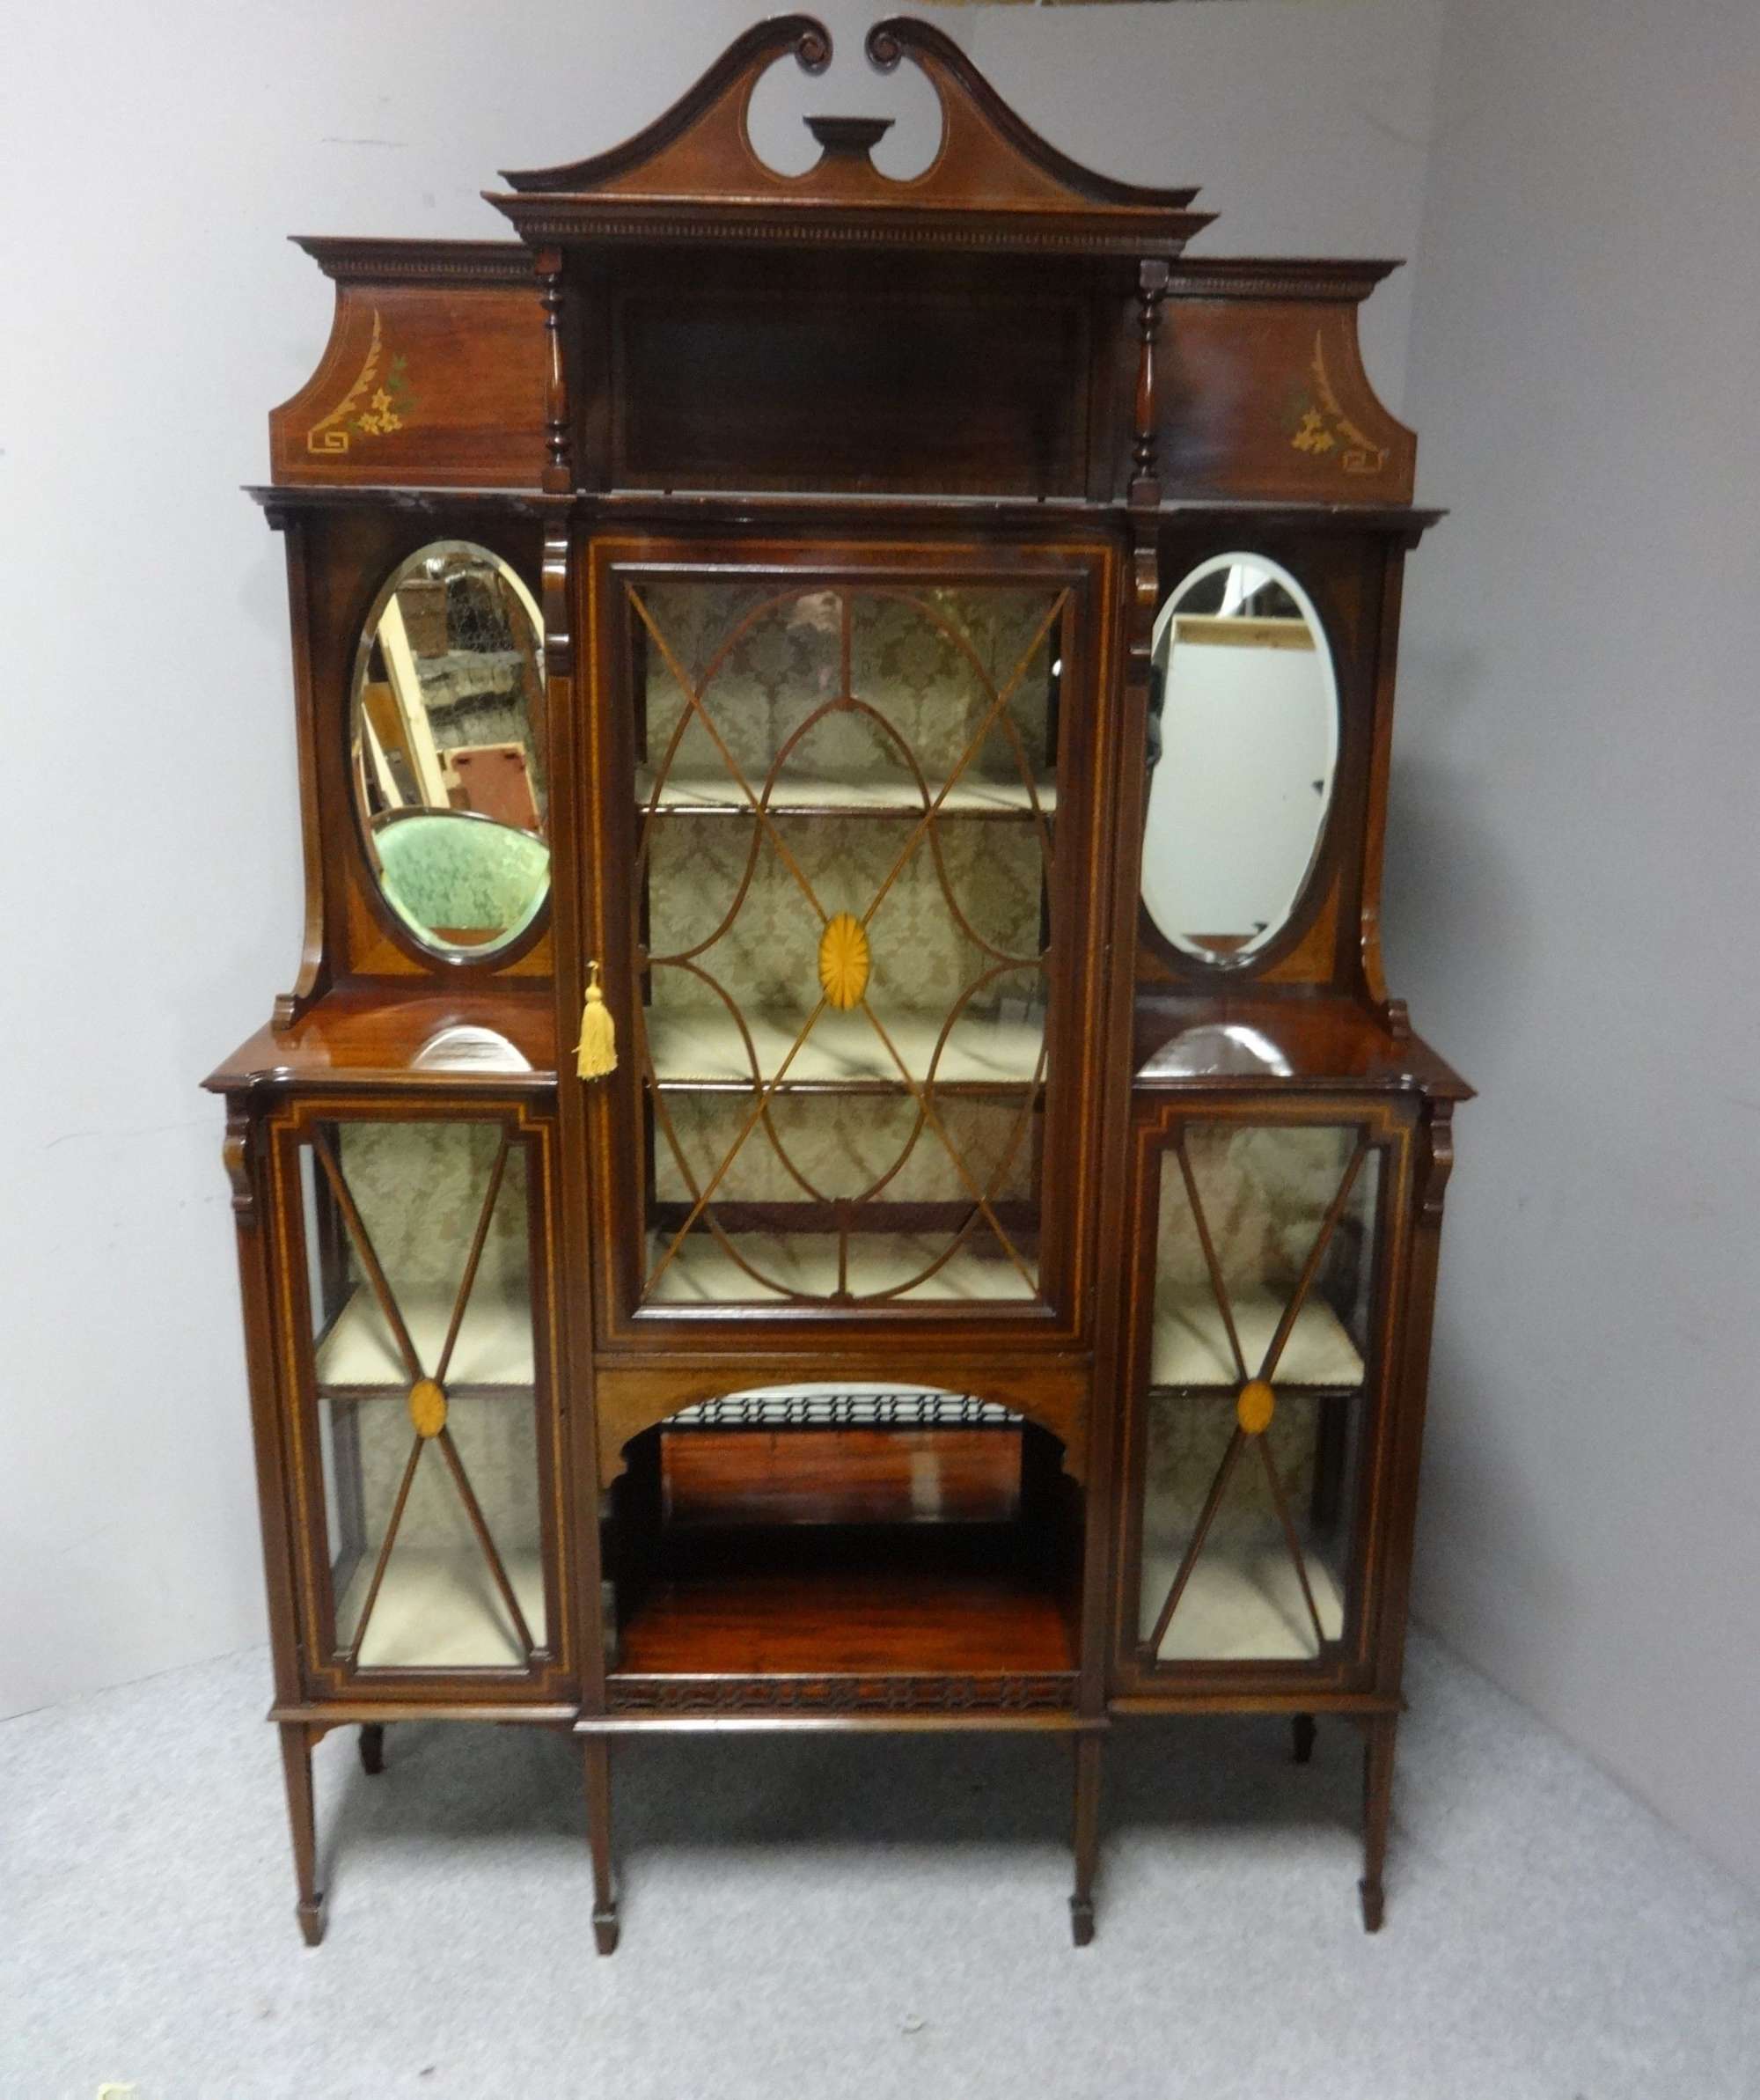 Outstanding Mahogany Inlaid Display Cabinet